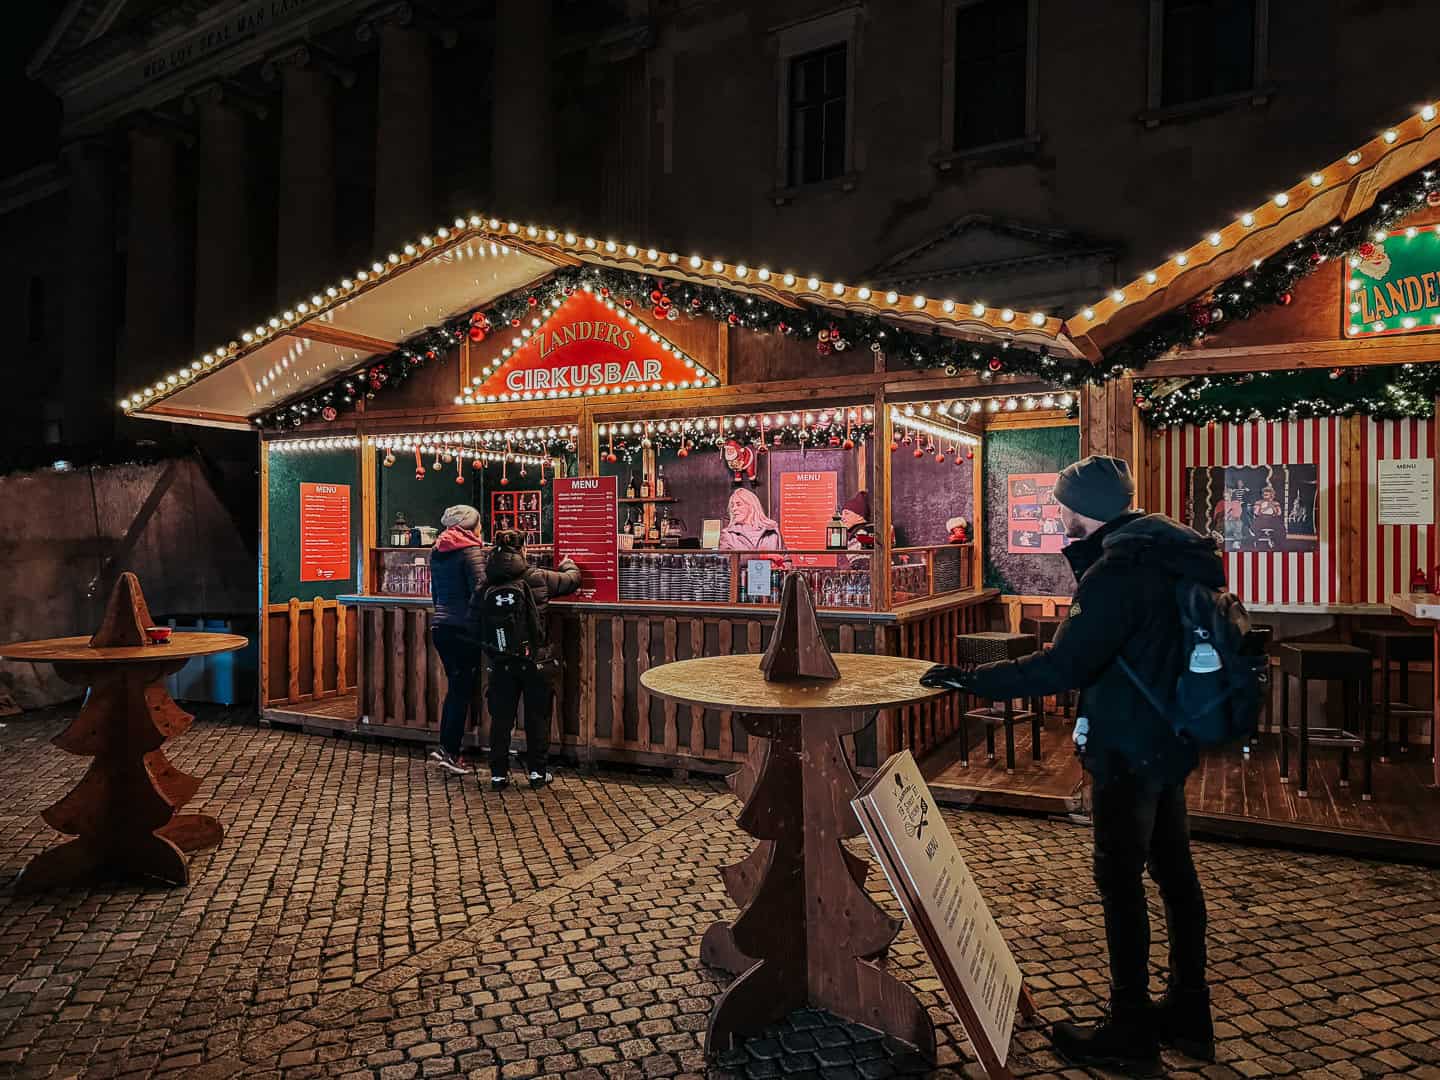 Nighttime at a Christmas market in Copenhagen with visitors gathered around Landers Cirkusbar, featuring a brightly lit menu and festive decorations